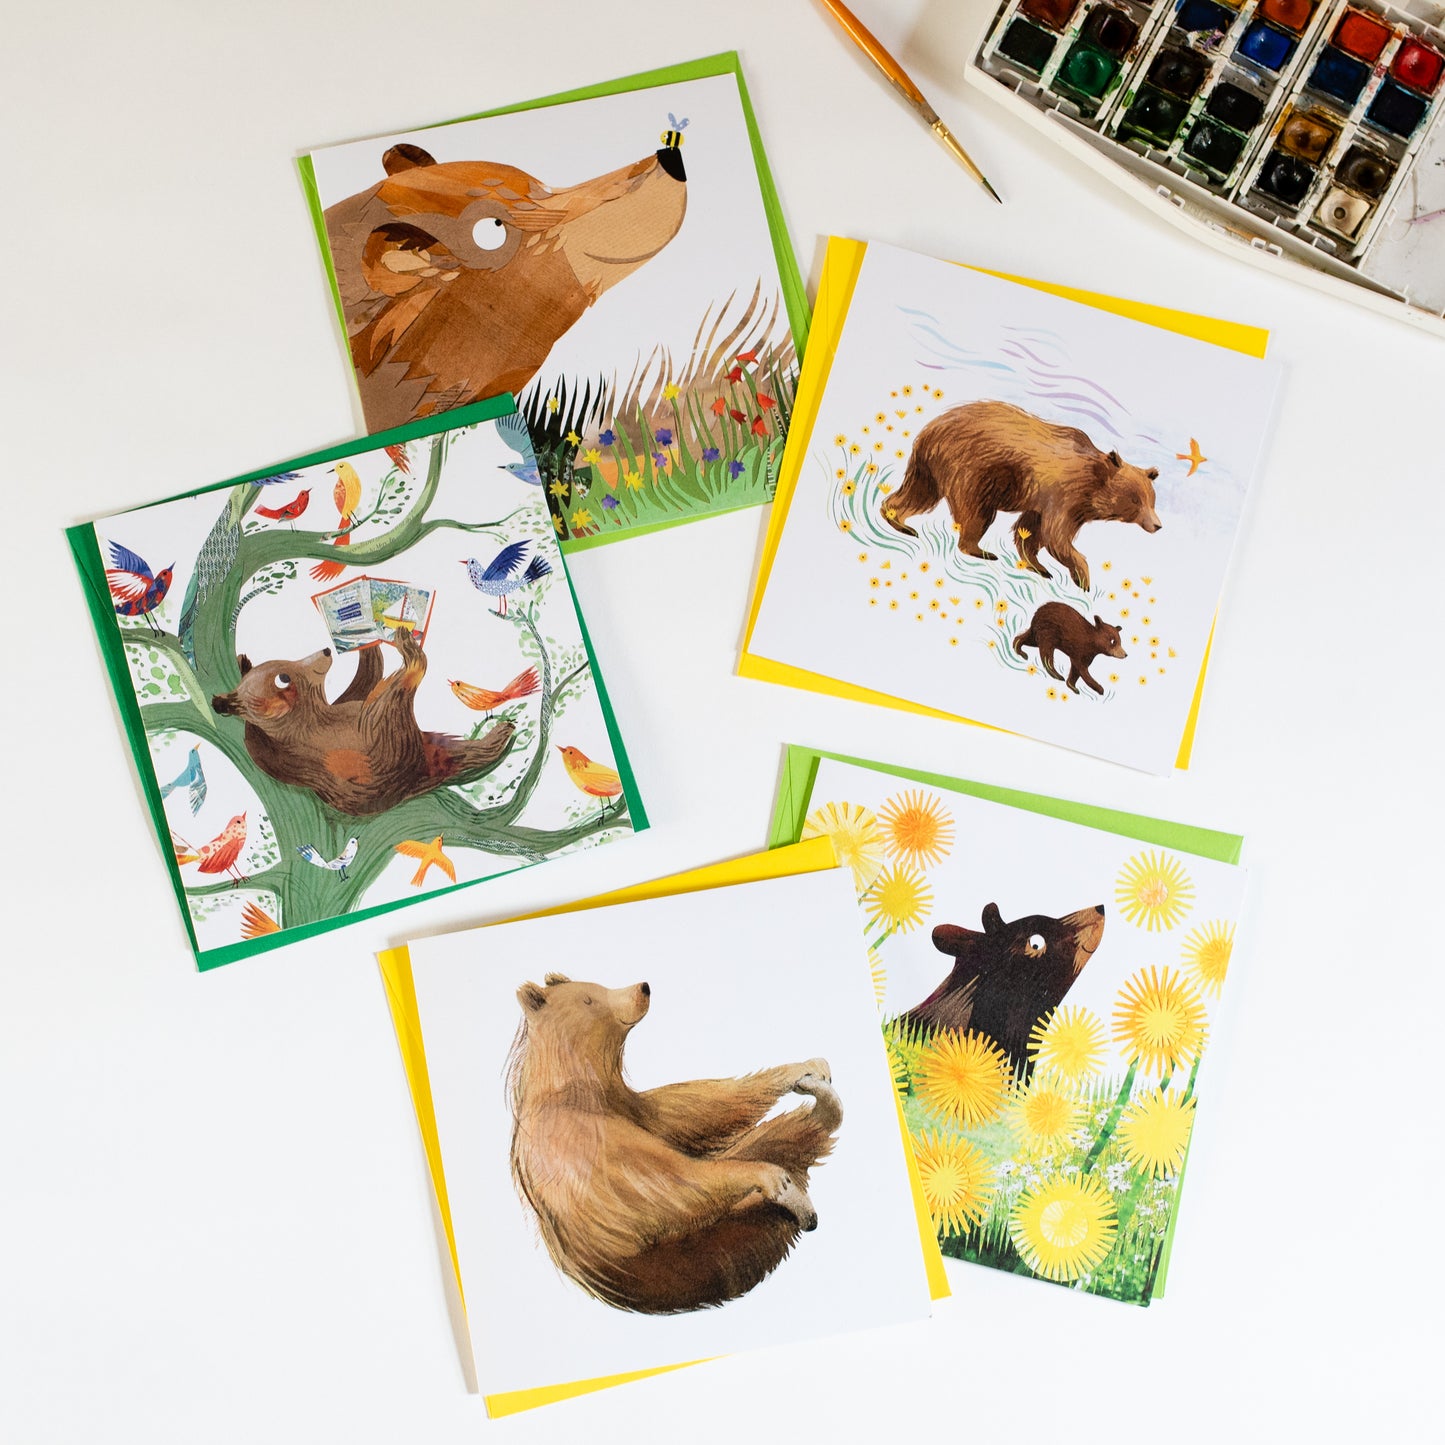 Surprise Pack of Greetings Cards